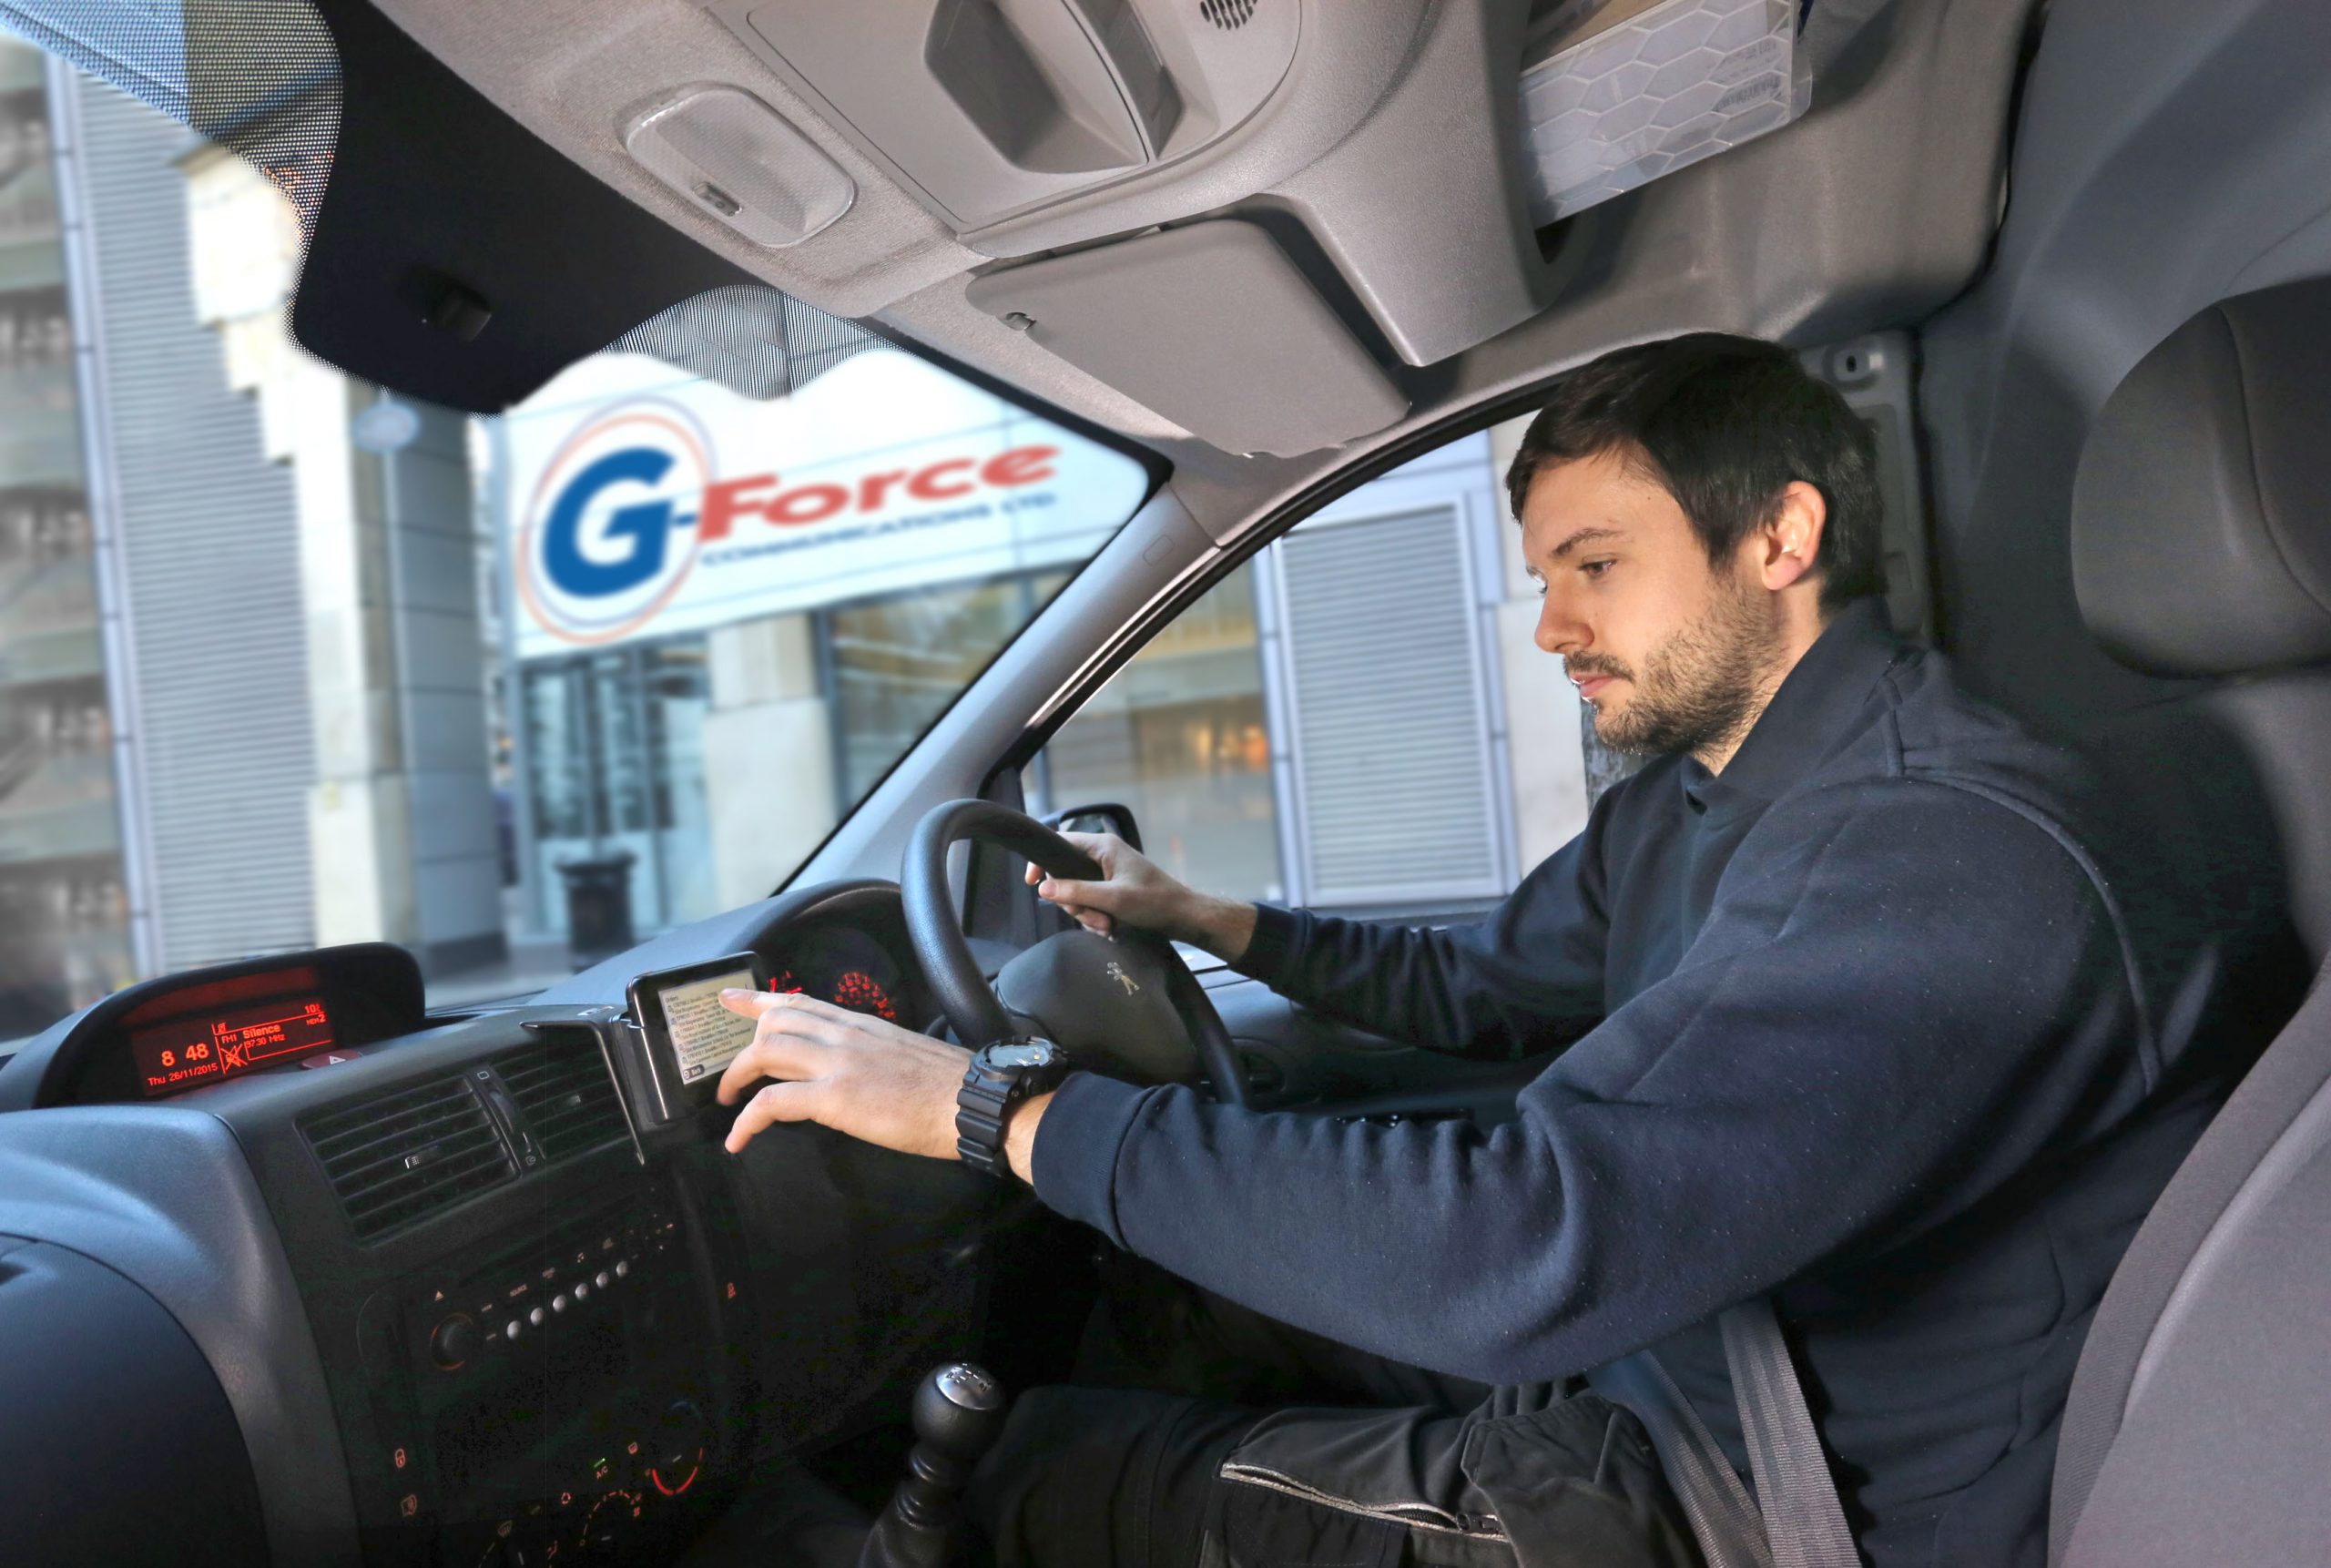 Maxoptra Powers Vehicle Scheduling for G-Force Telematics Users